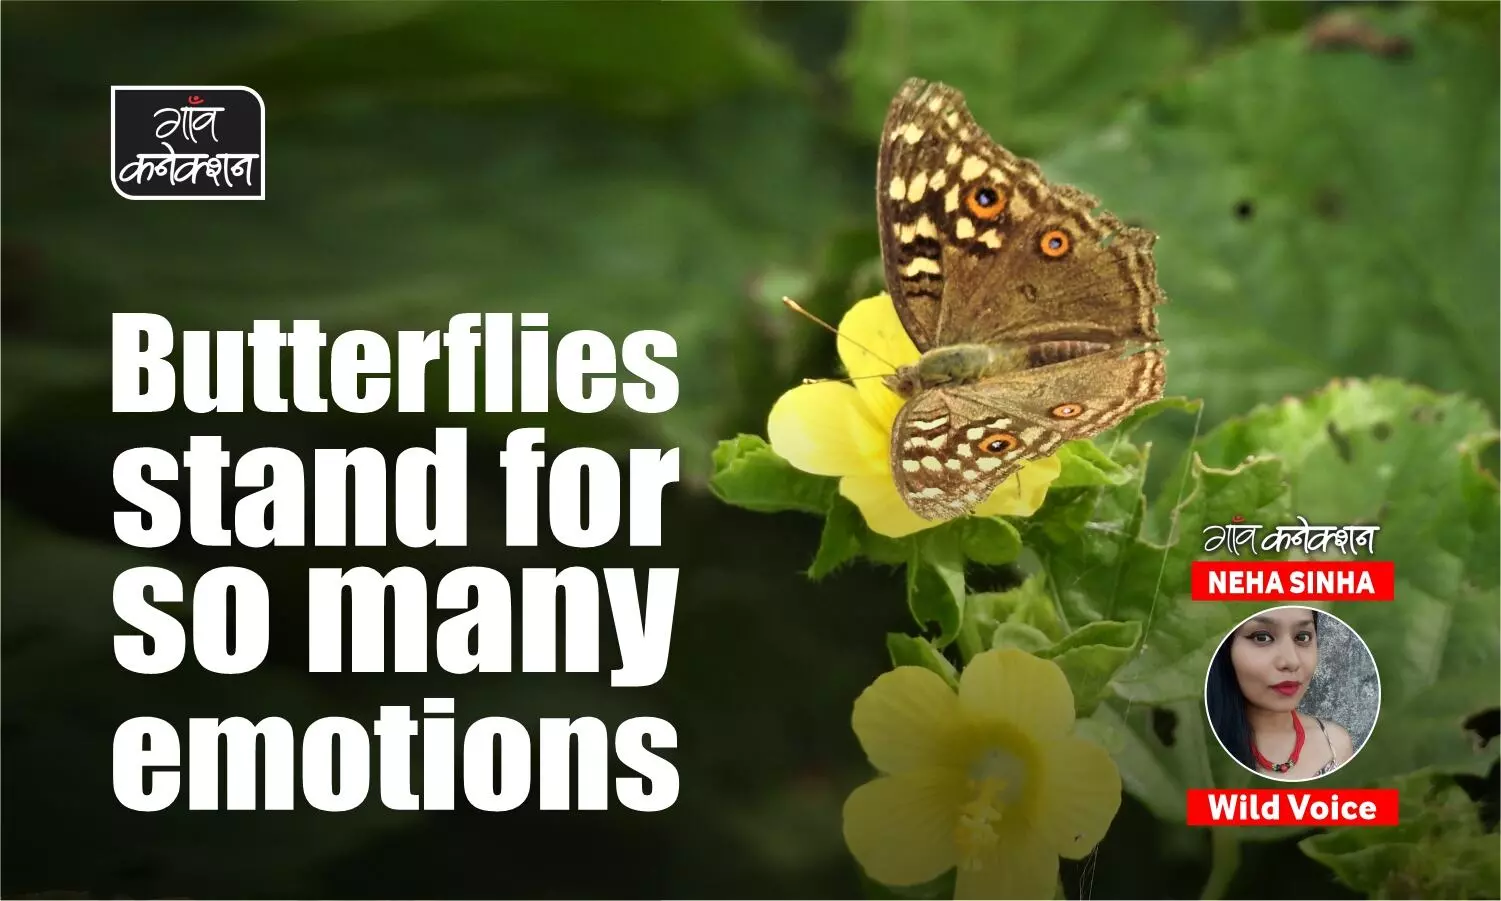 As parts of the world become hotter and drier, one wonders where the butterflies will go